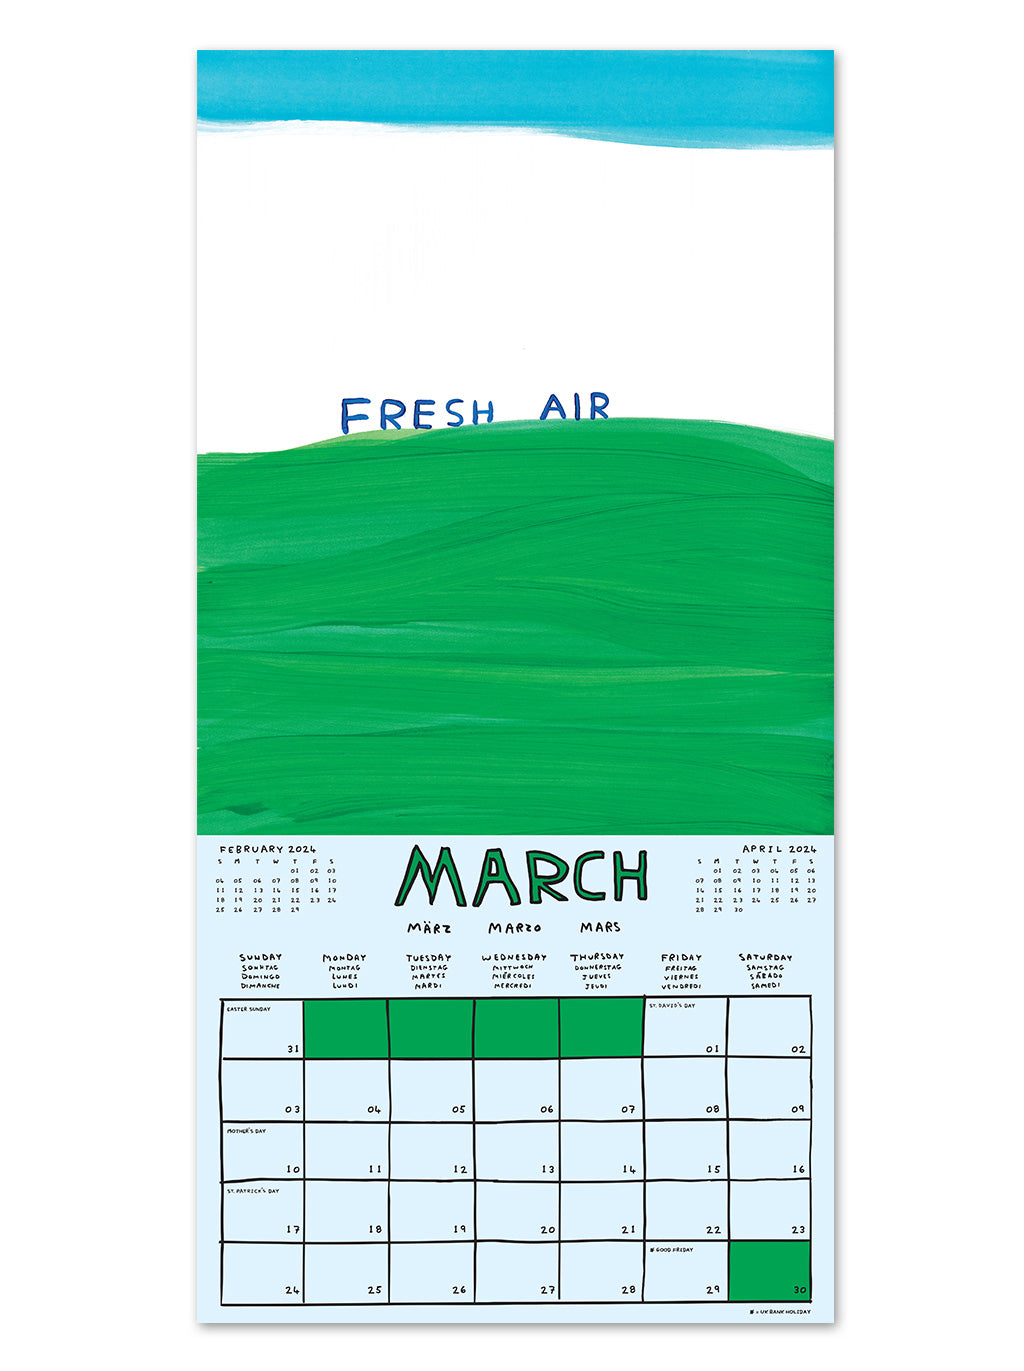 An example of the layout of a 2024 calendar by artist David Shrigley. March shows a light blue calendar section with a box allocated to each day of the month. The artwork on the top half of the page has a white background and shows a painted green hill and white and blue sky  with the words - fresh air.